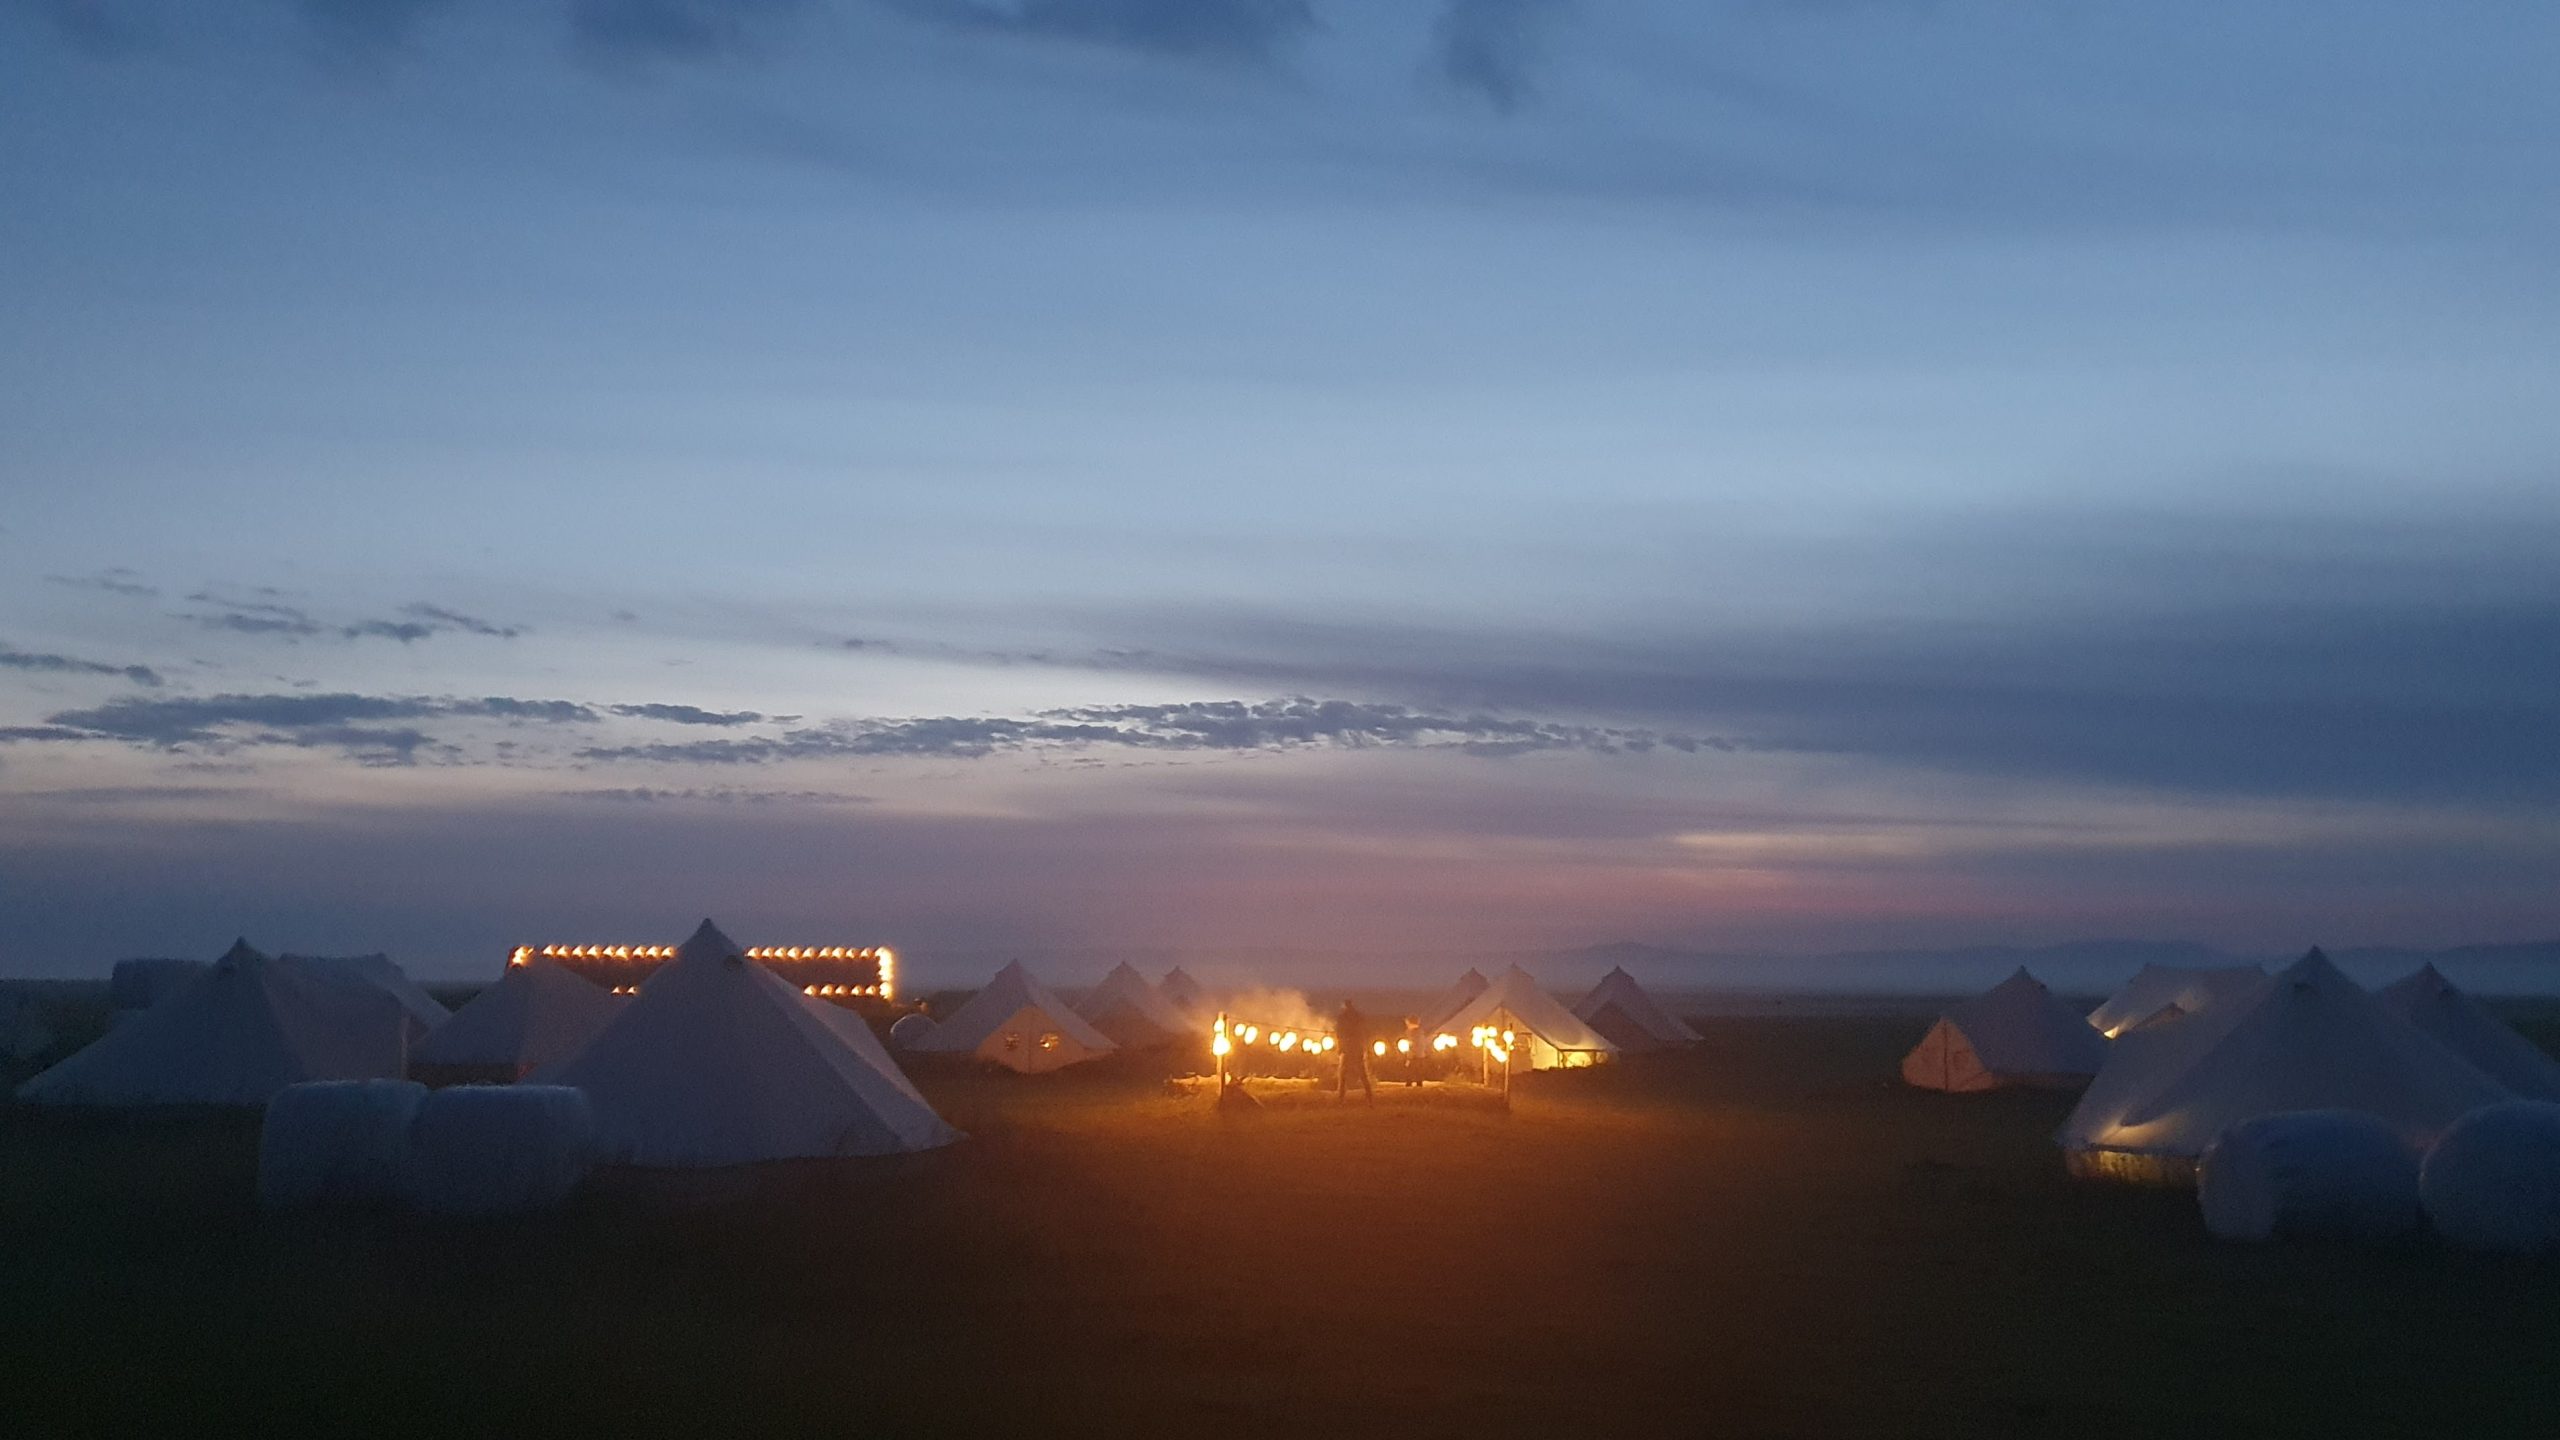 Evening at glamping site